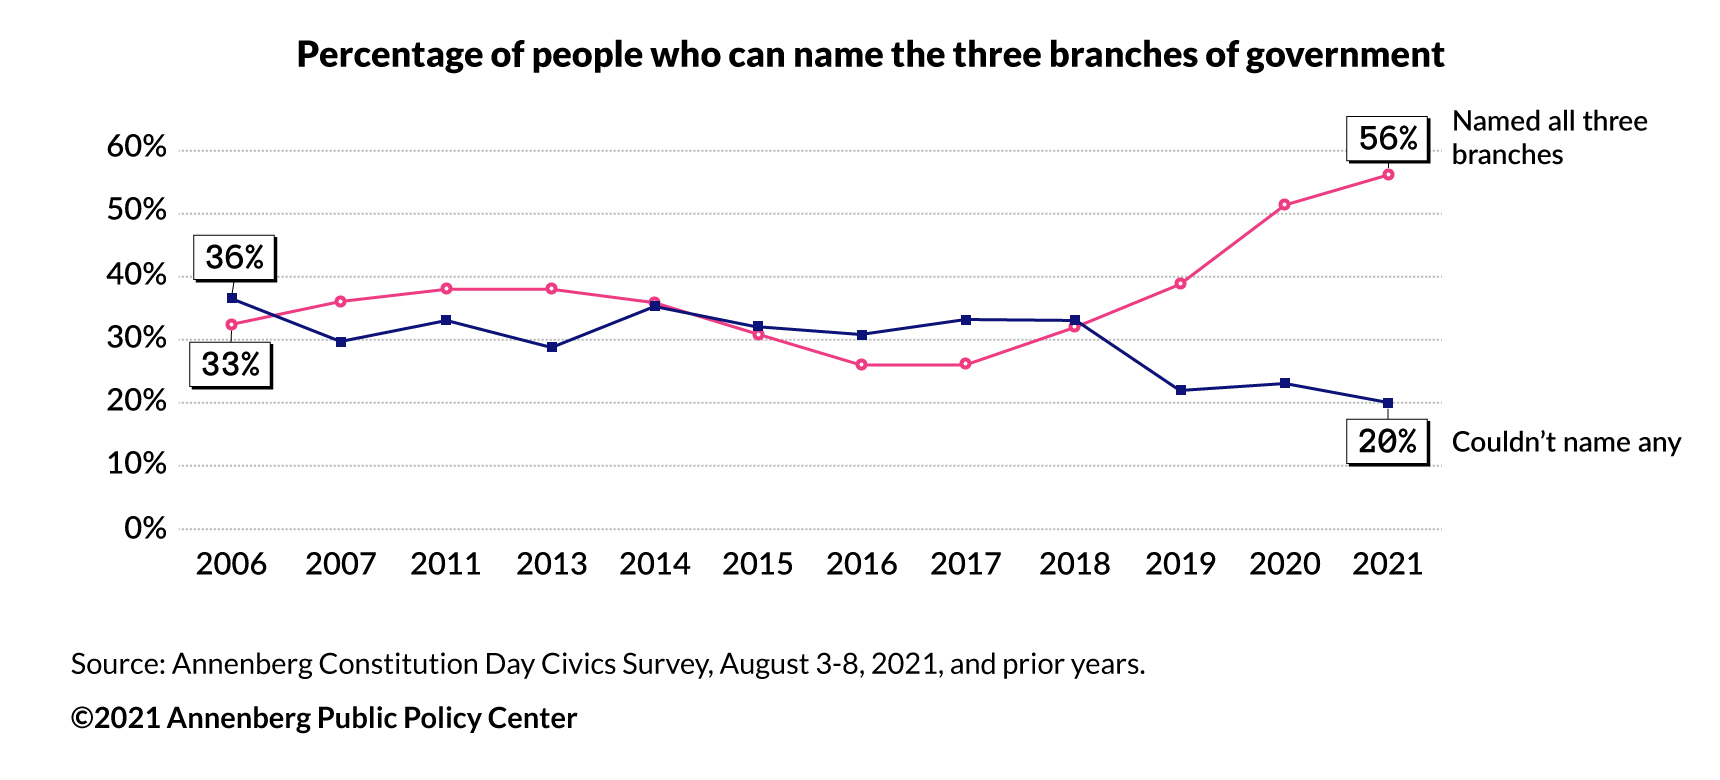 Chart showing the percentage of people who can name the three branches of U.S. government.